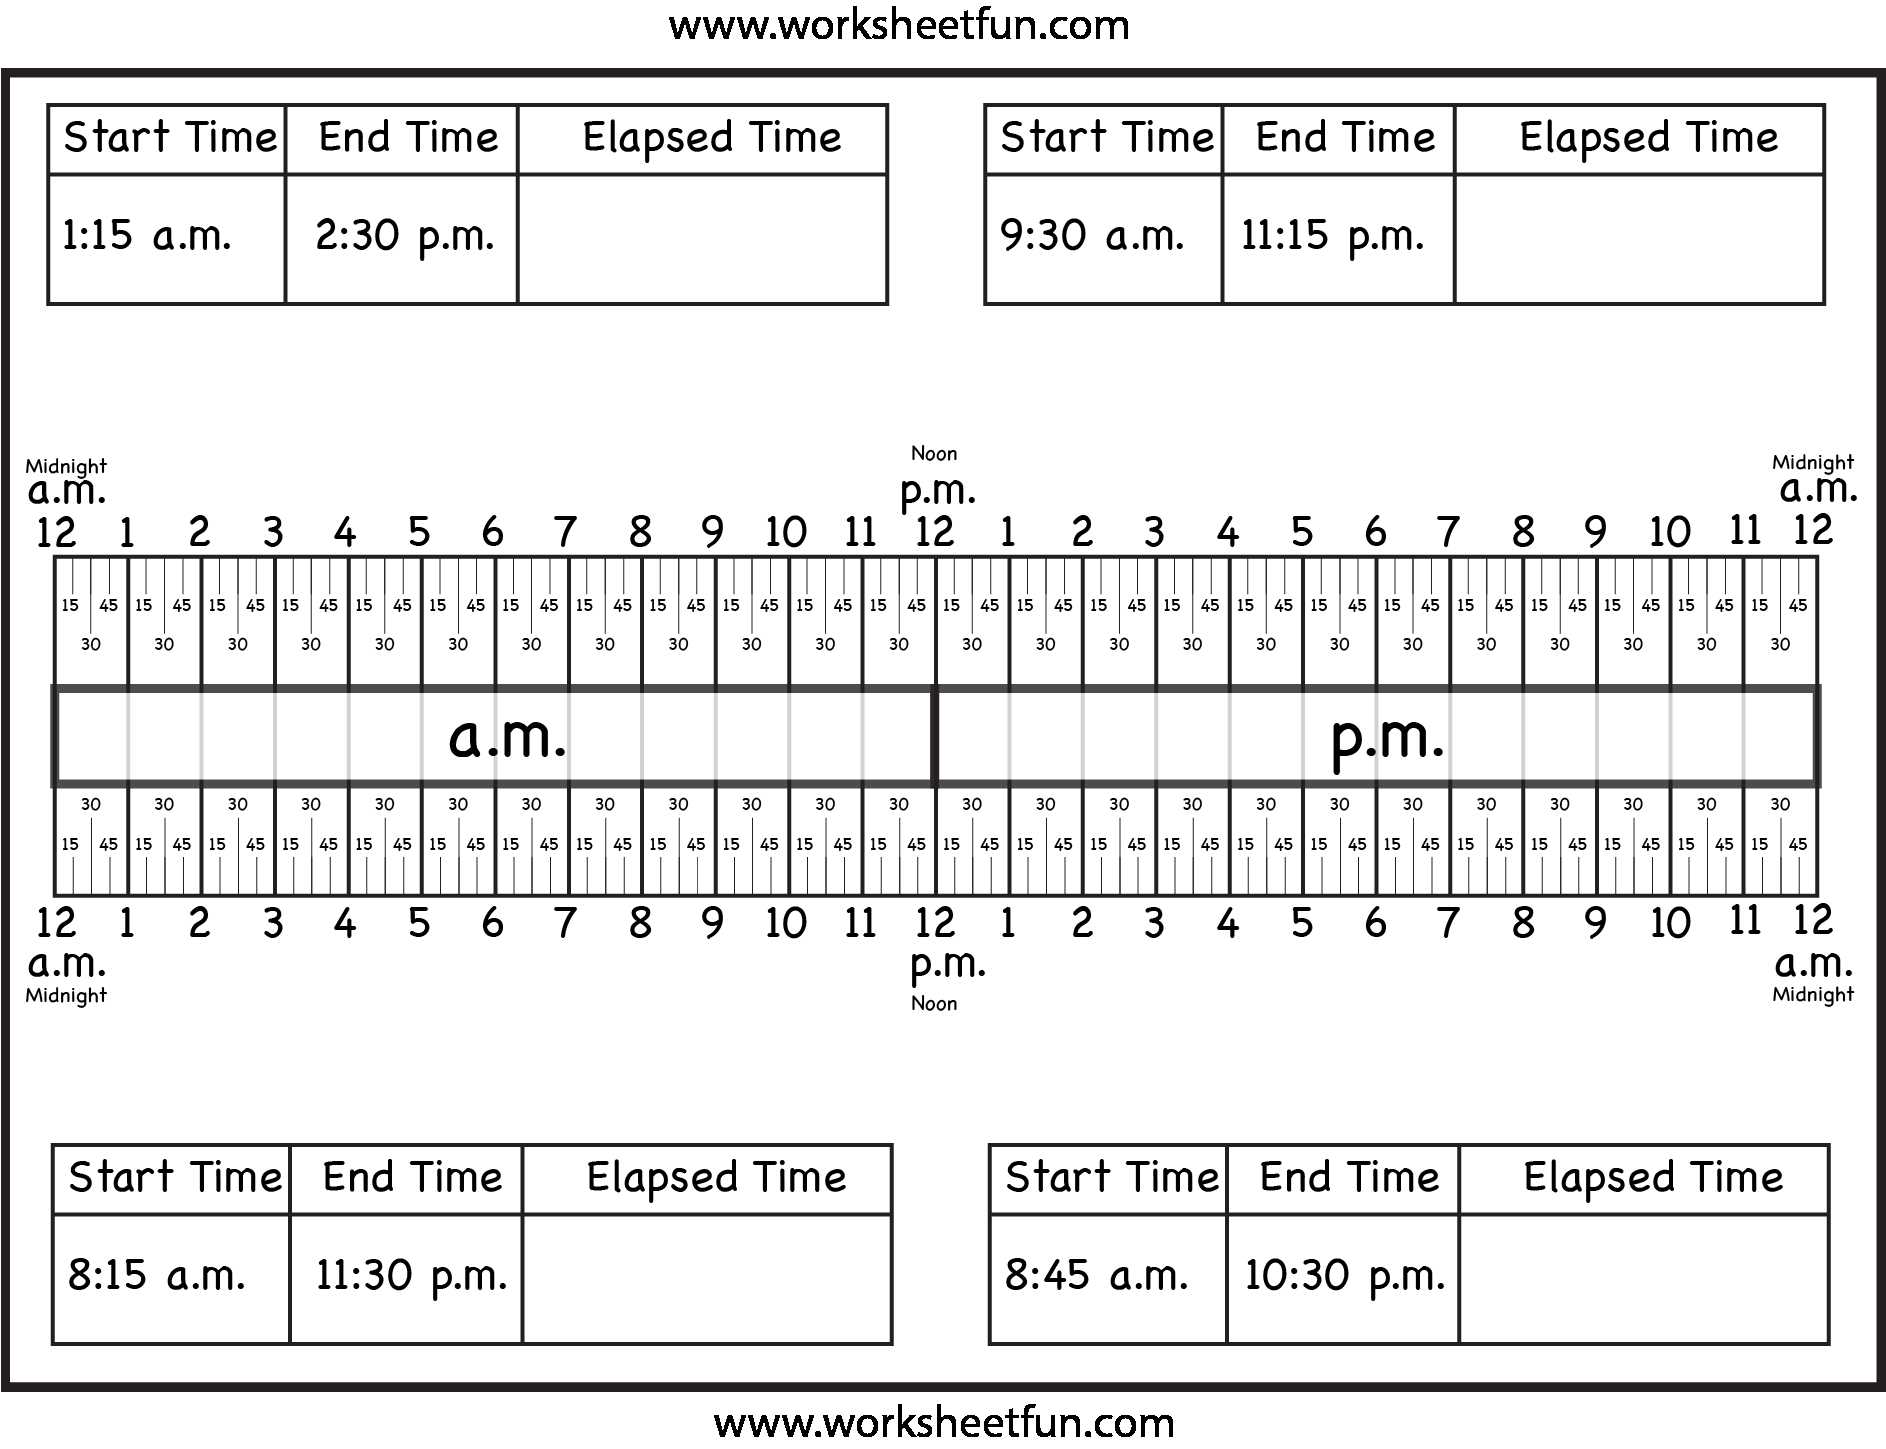 Time to the Hour Worksheets Also Calculate Elapsed Time Using Elapsed Time Ruler – Quarter Hours 15